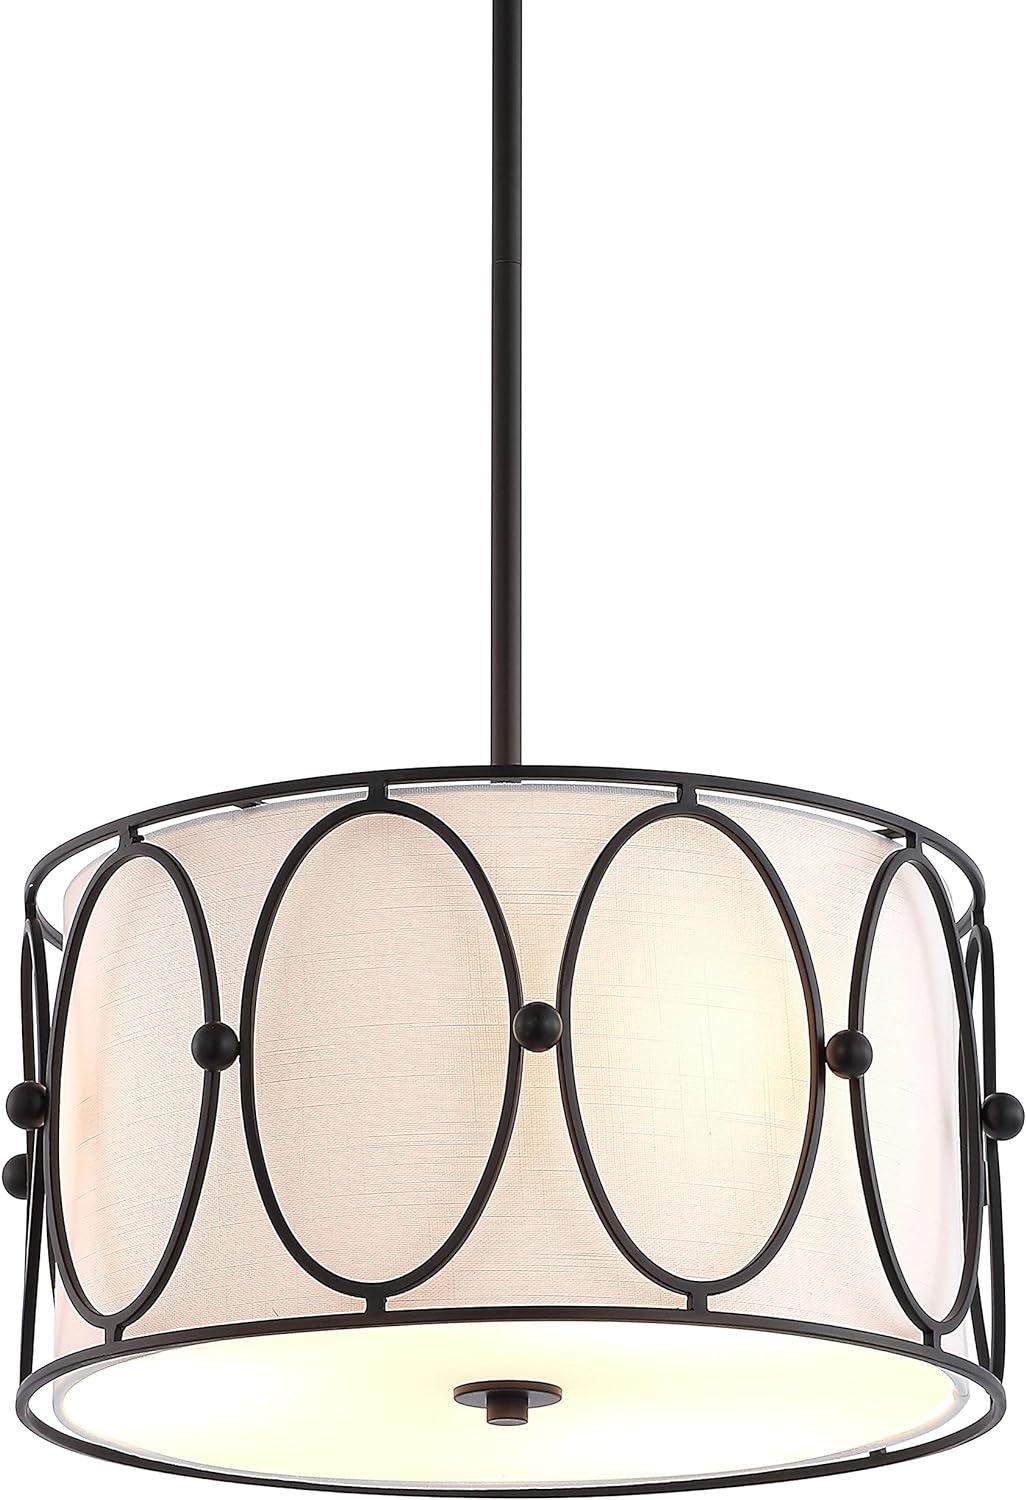 Violetta Coastal-Transitional 19" LED Drum Pendant in Oil-Rubbed Bronze with White Shade